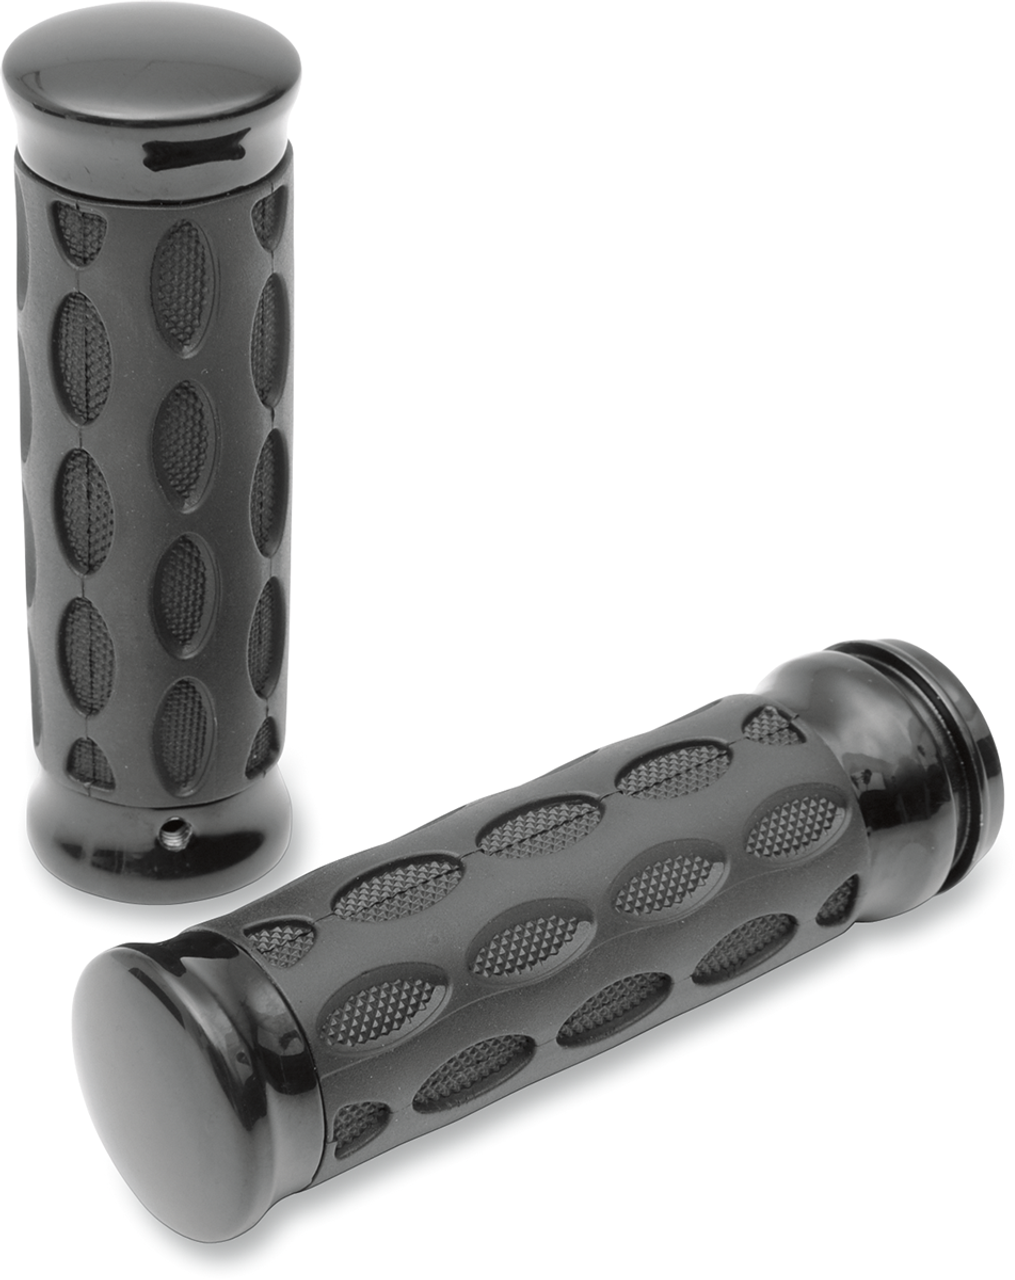 Grips - Hotop - Black/Rubber